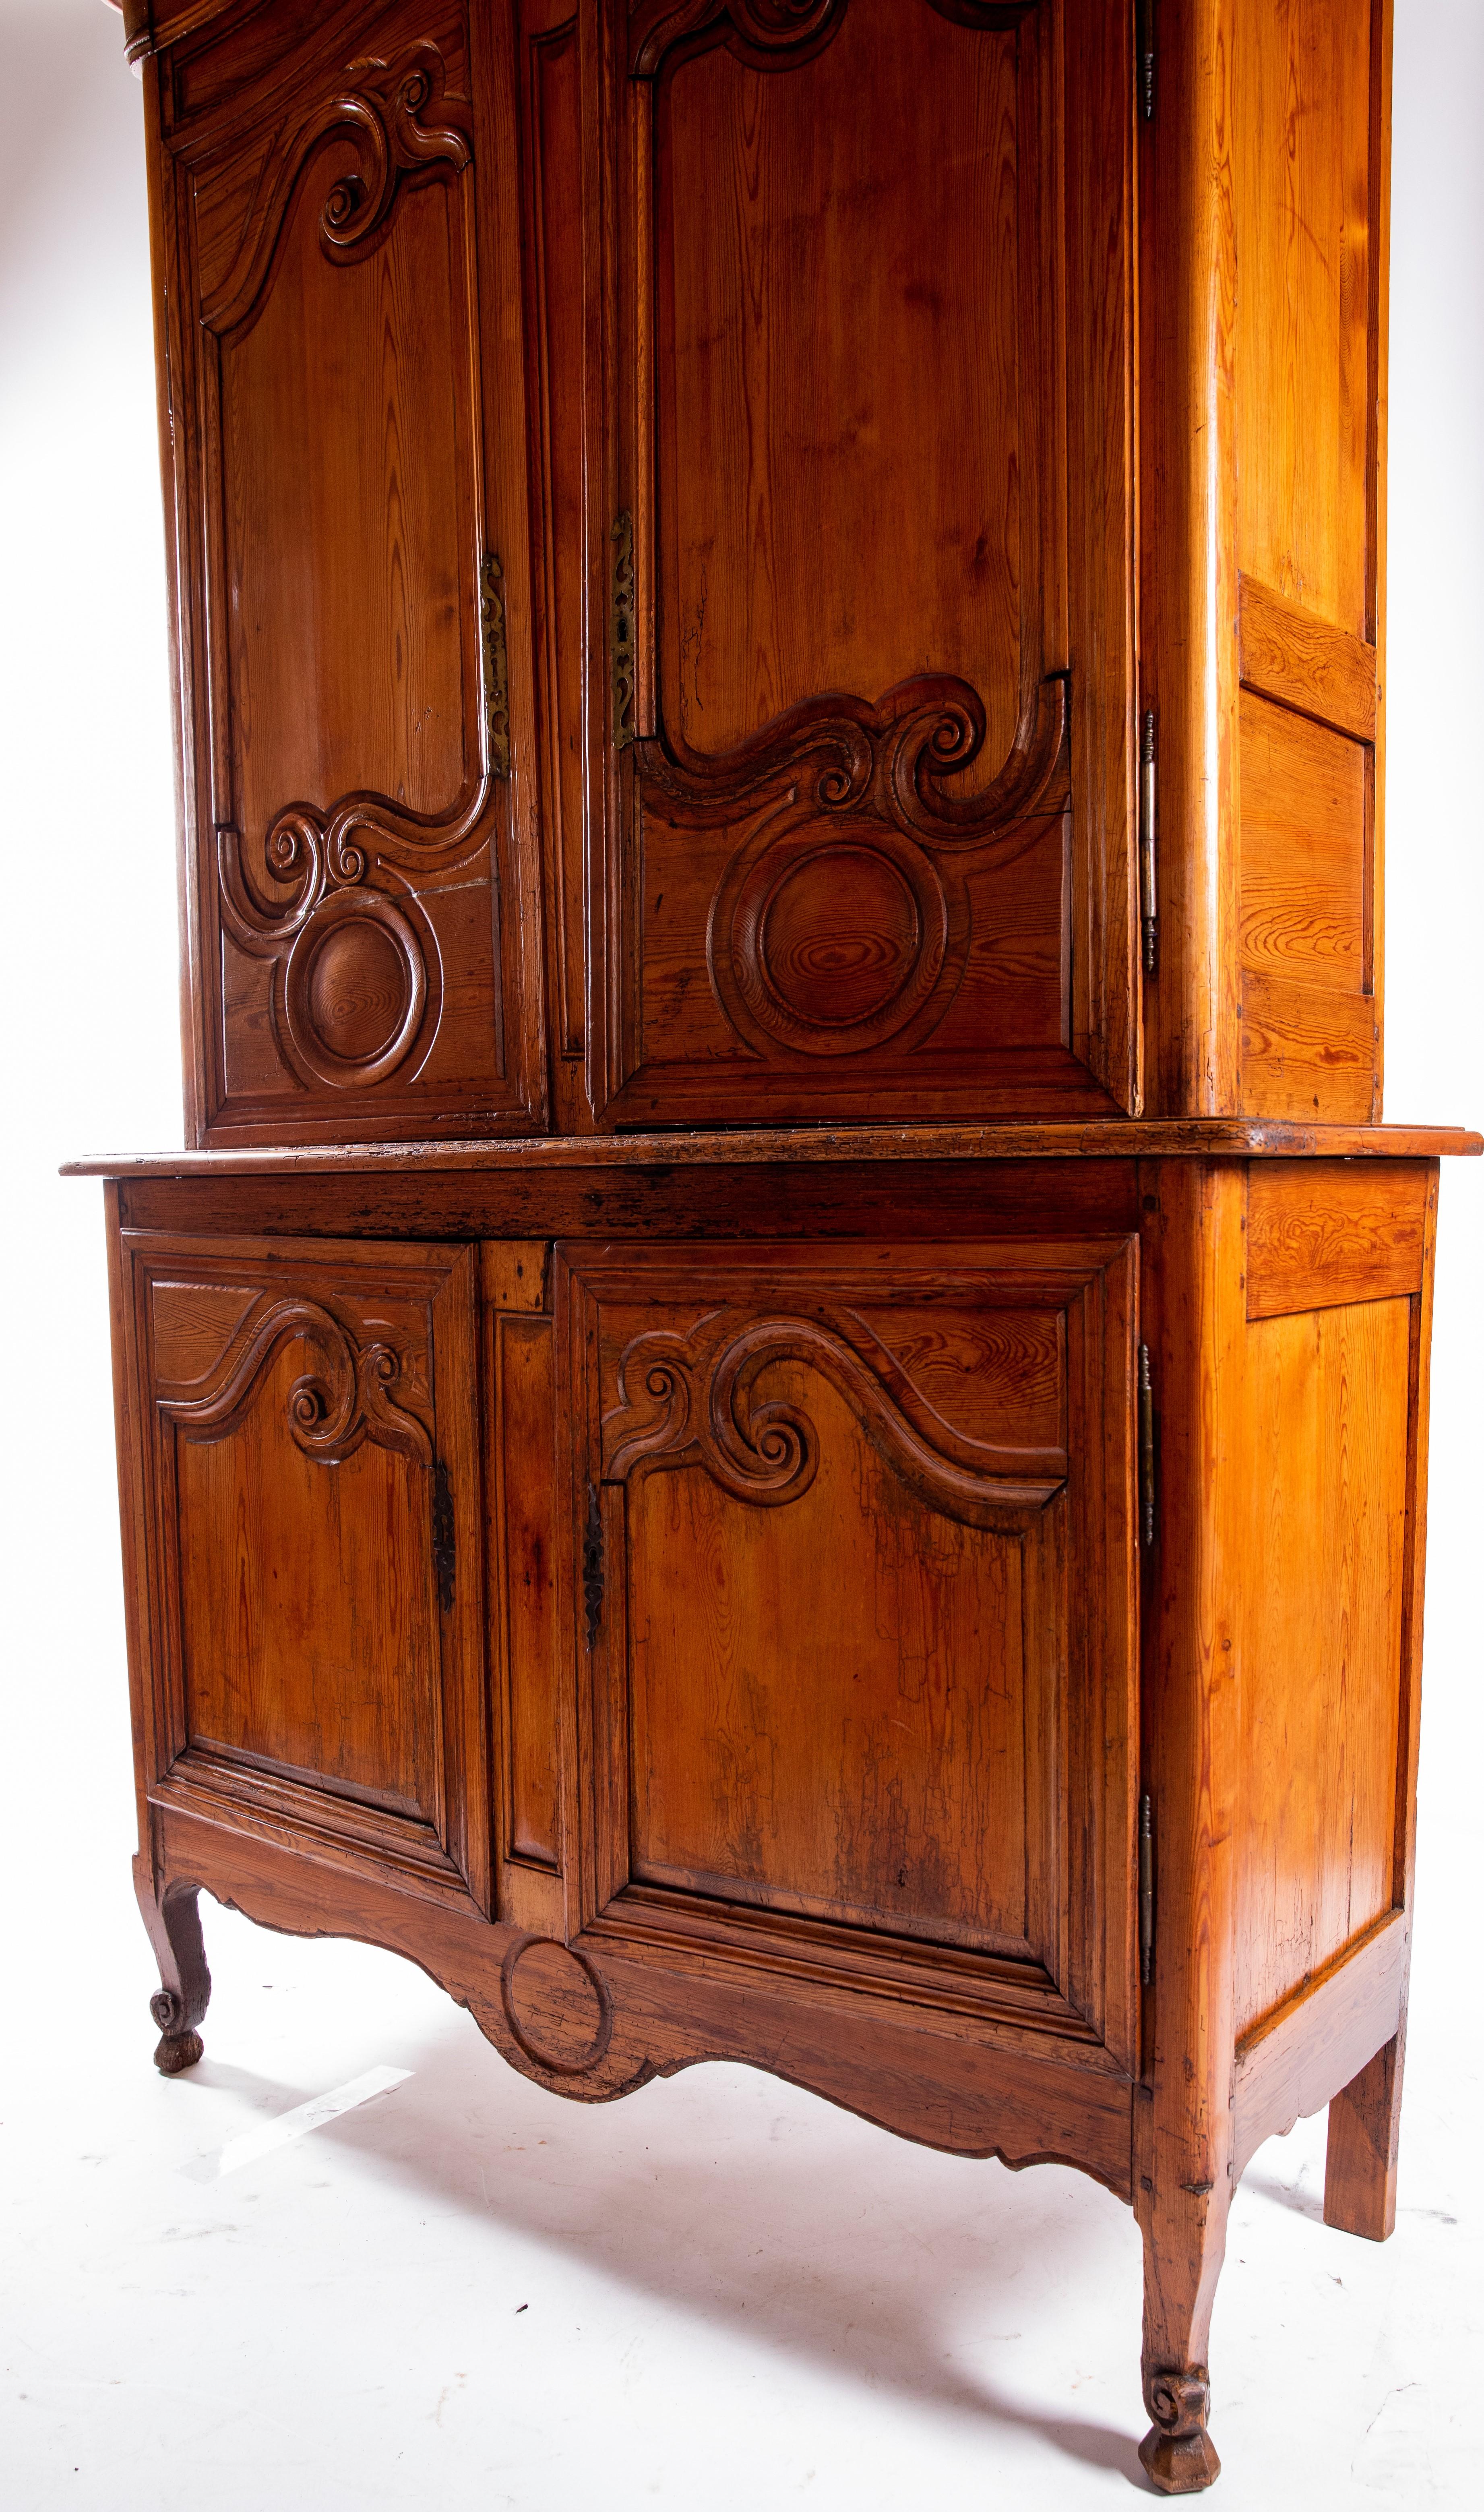 European 18th Century French Carved Pine Hutch For Sale